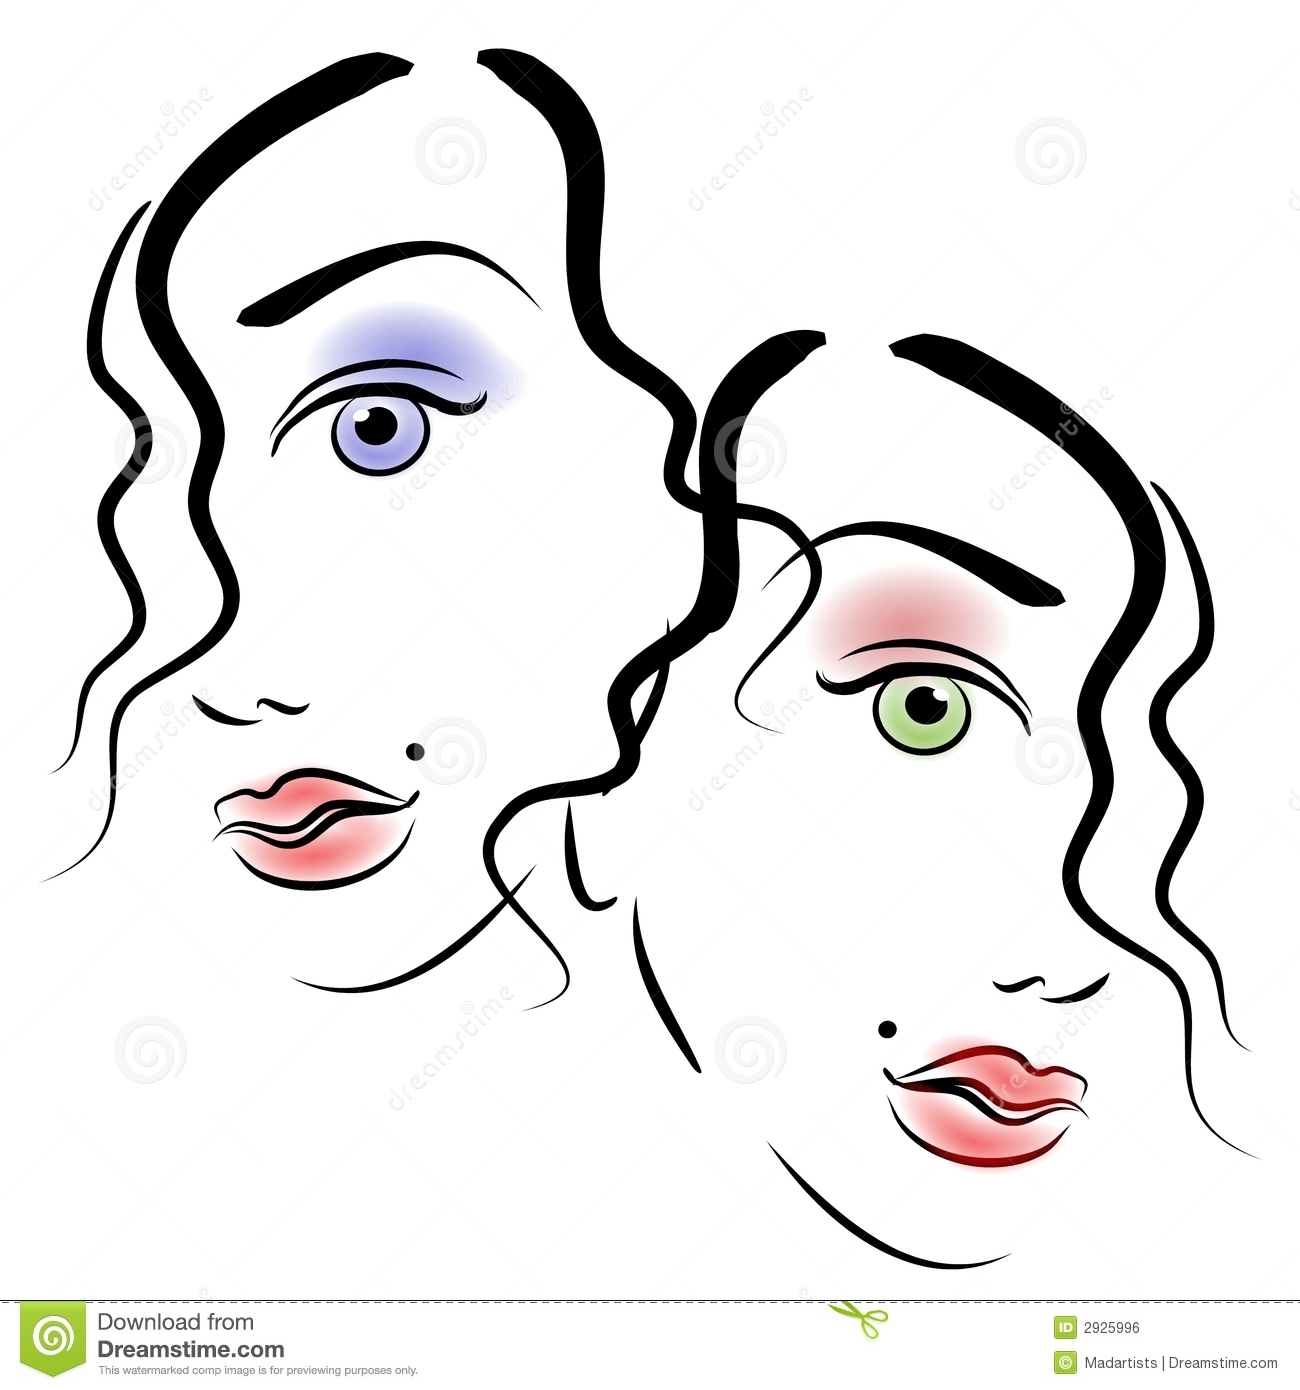 Faces of Women Clip Art 3 Royalty Free Stock Image